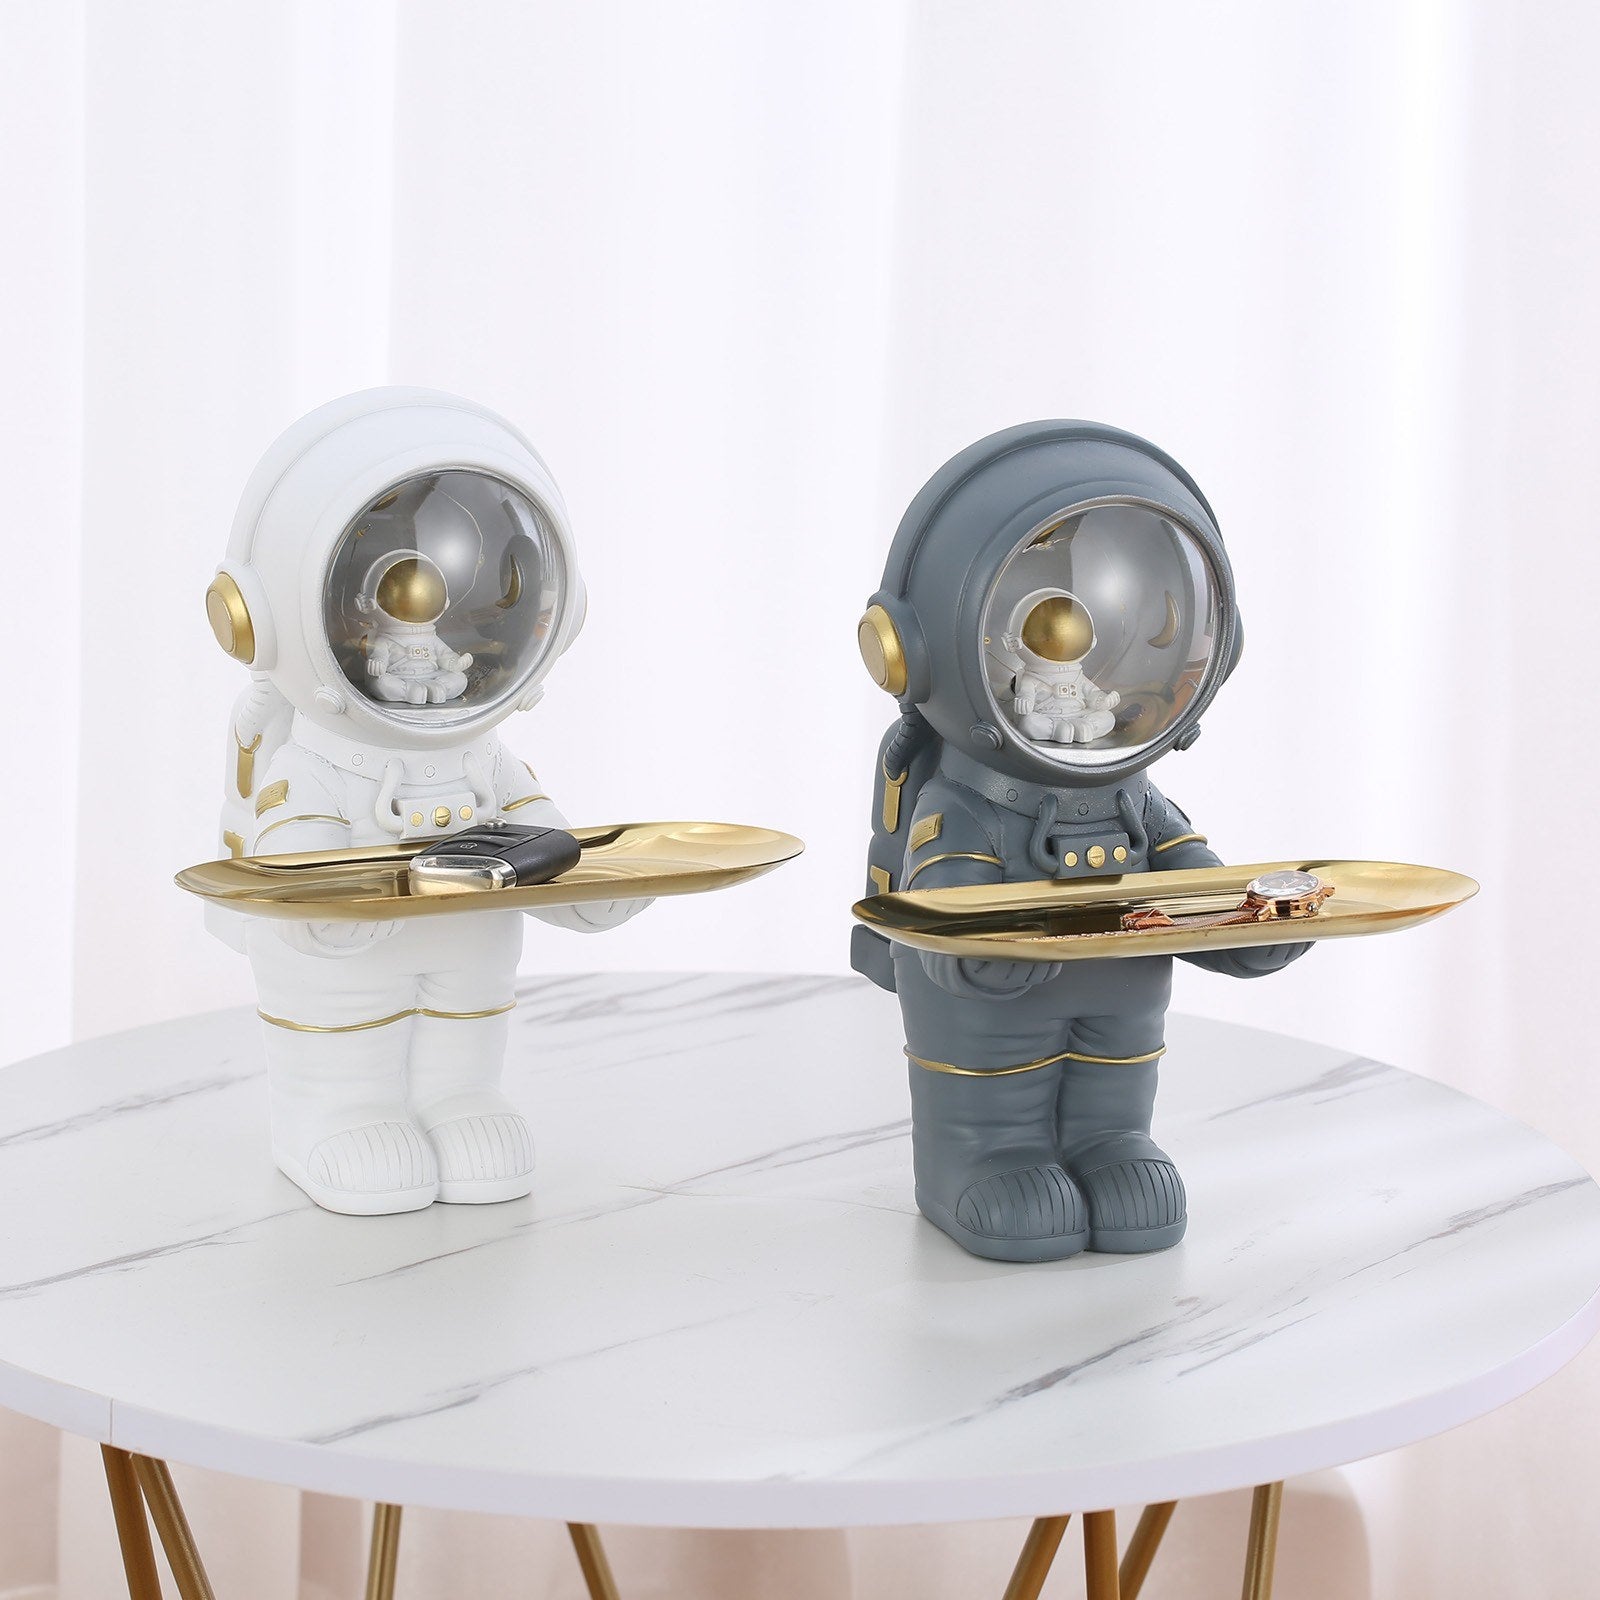 Little astronauts will be able to dream big with this astronaut figurine